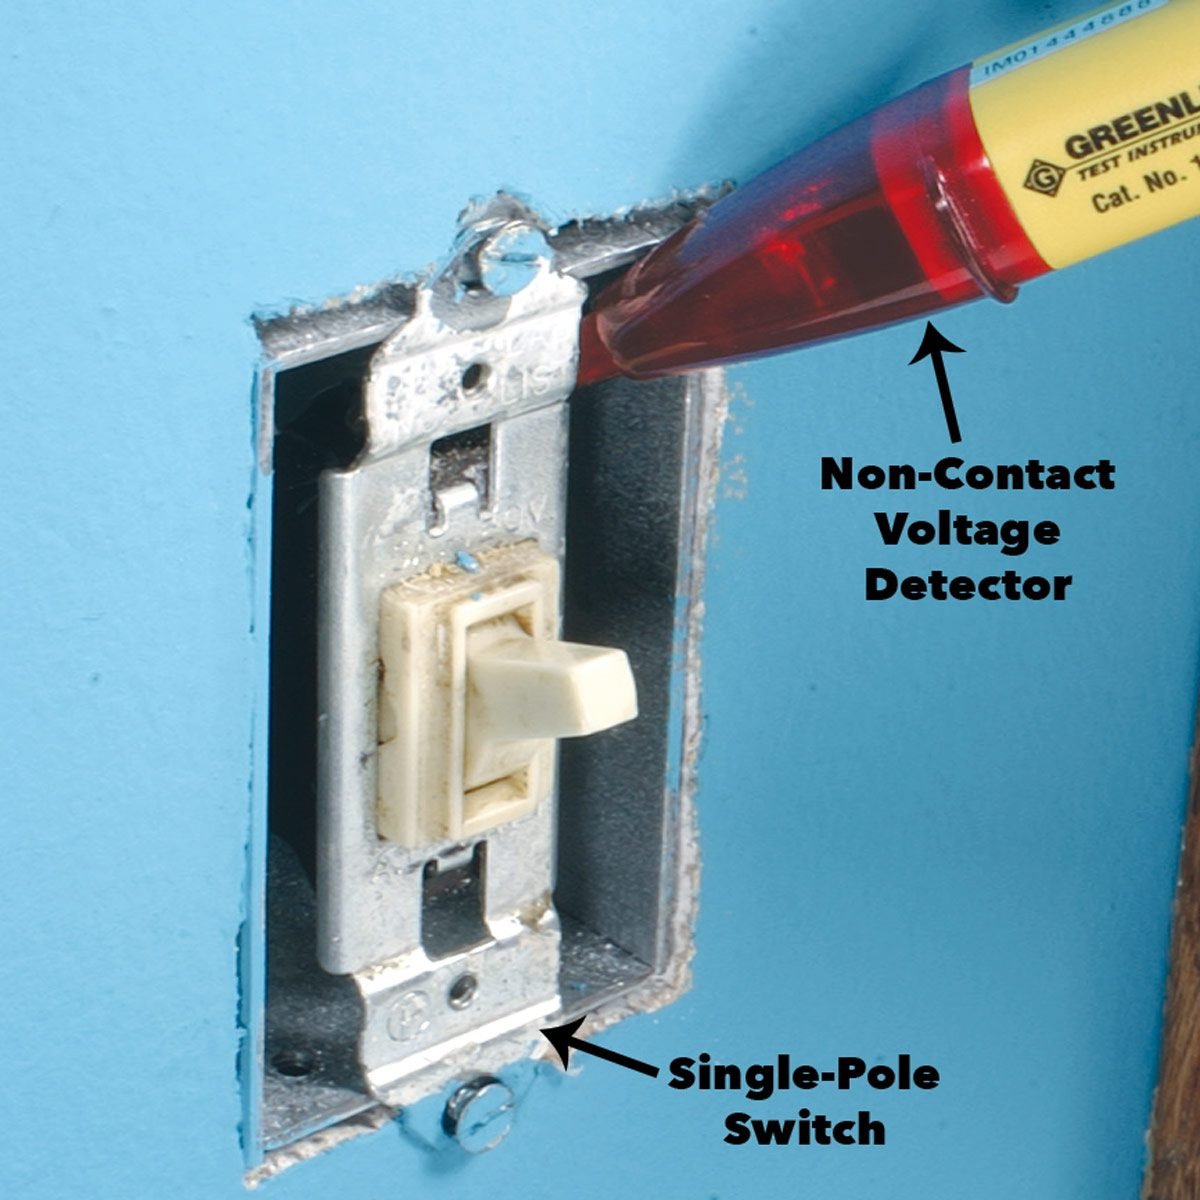 How To Install A Dimmer Light Switch Wiring And Replacement